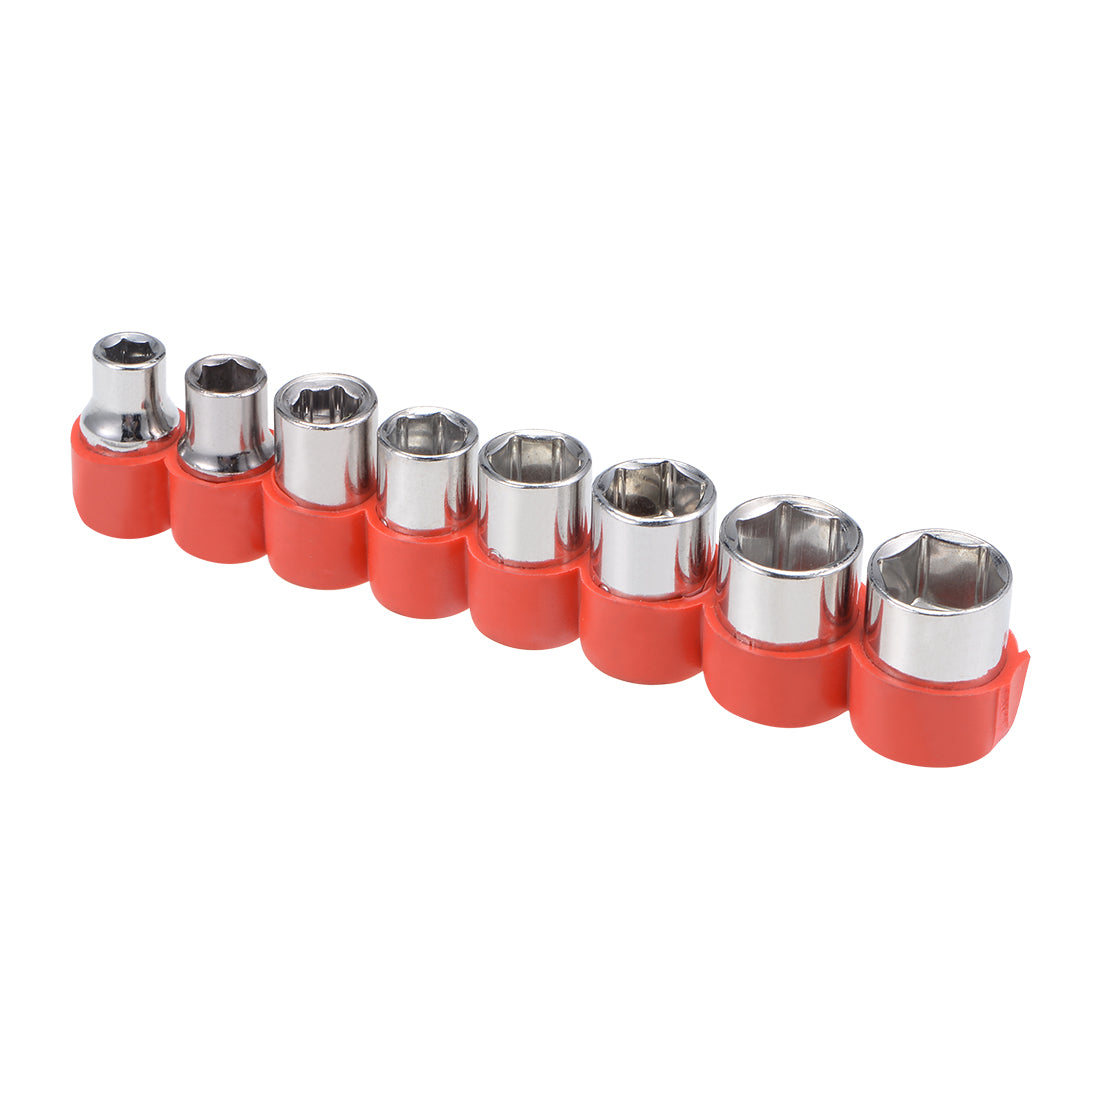 uxcell Uxcell 1/4-Inch Drive Hex Socket Set 5mm - 12mm Metric Cr-V, 1 Set